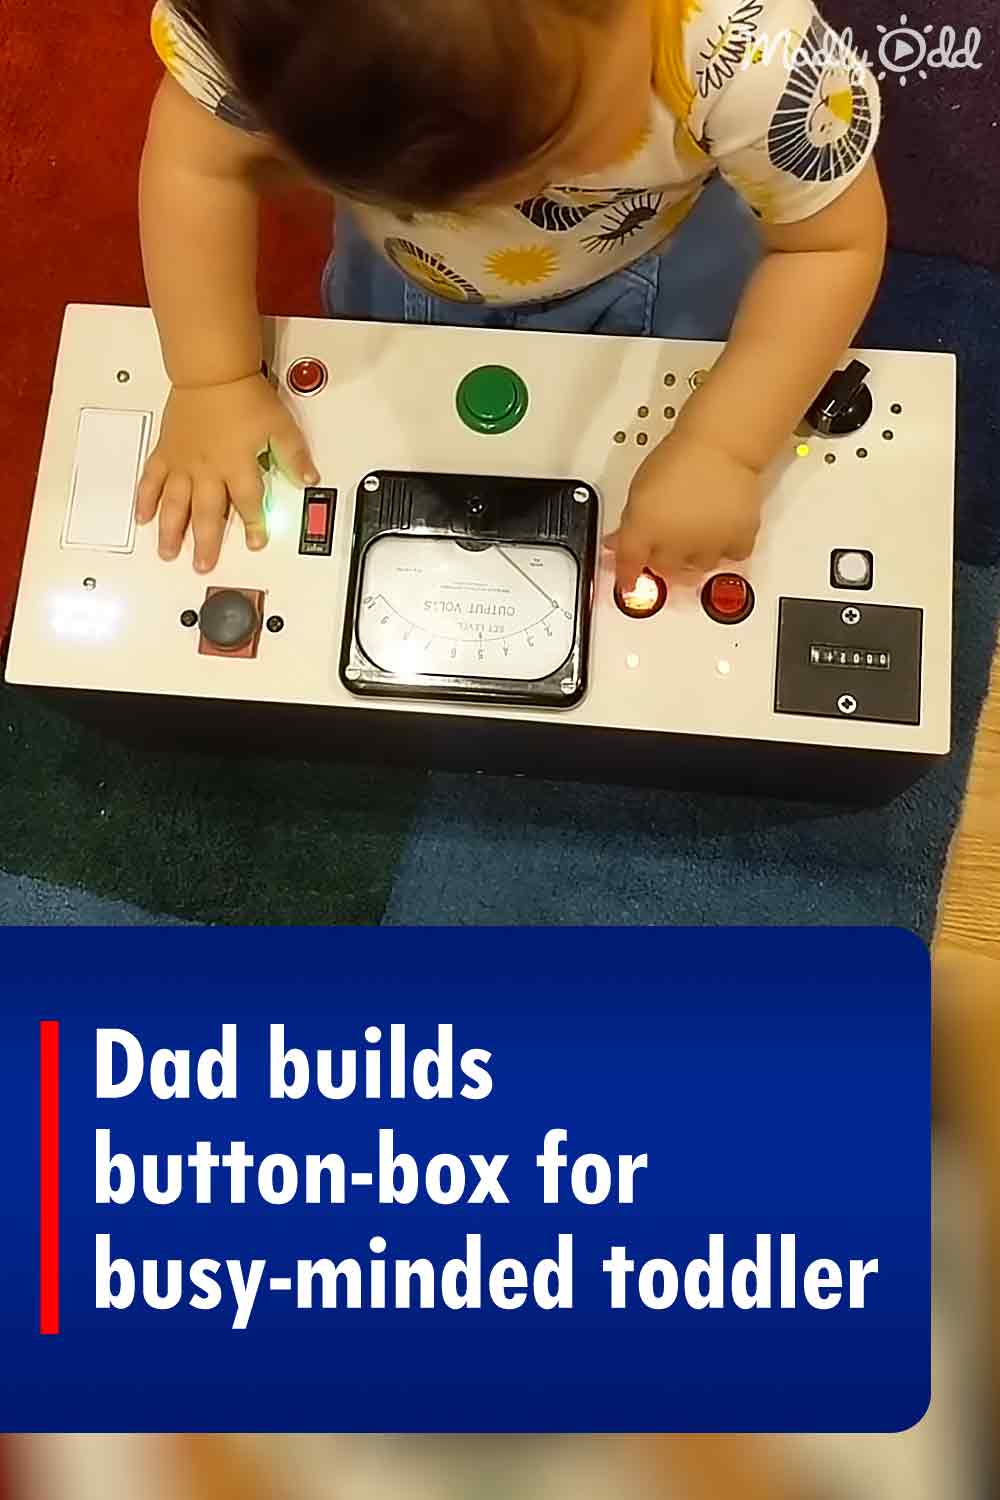 Dad builds button-box for busy-minded toddler